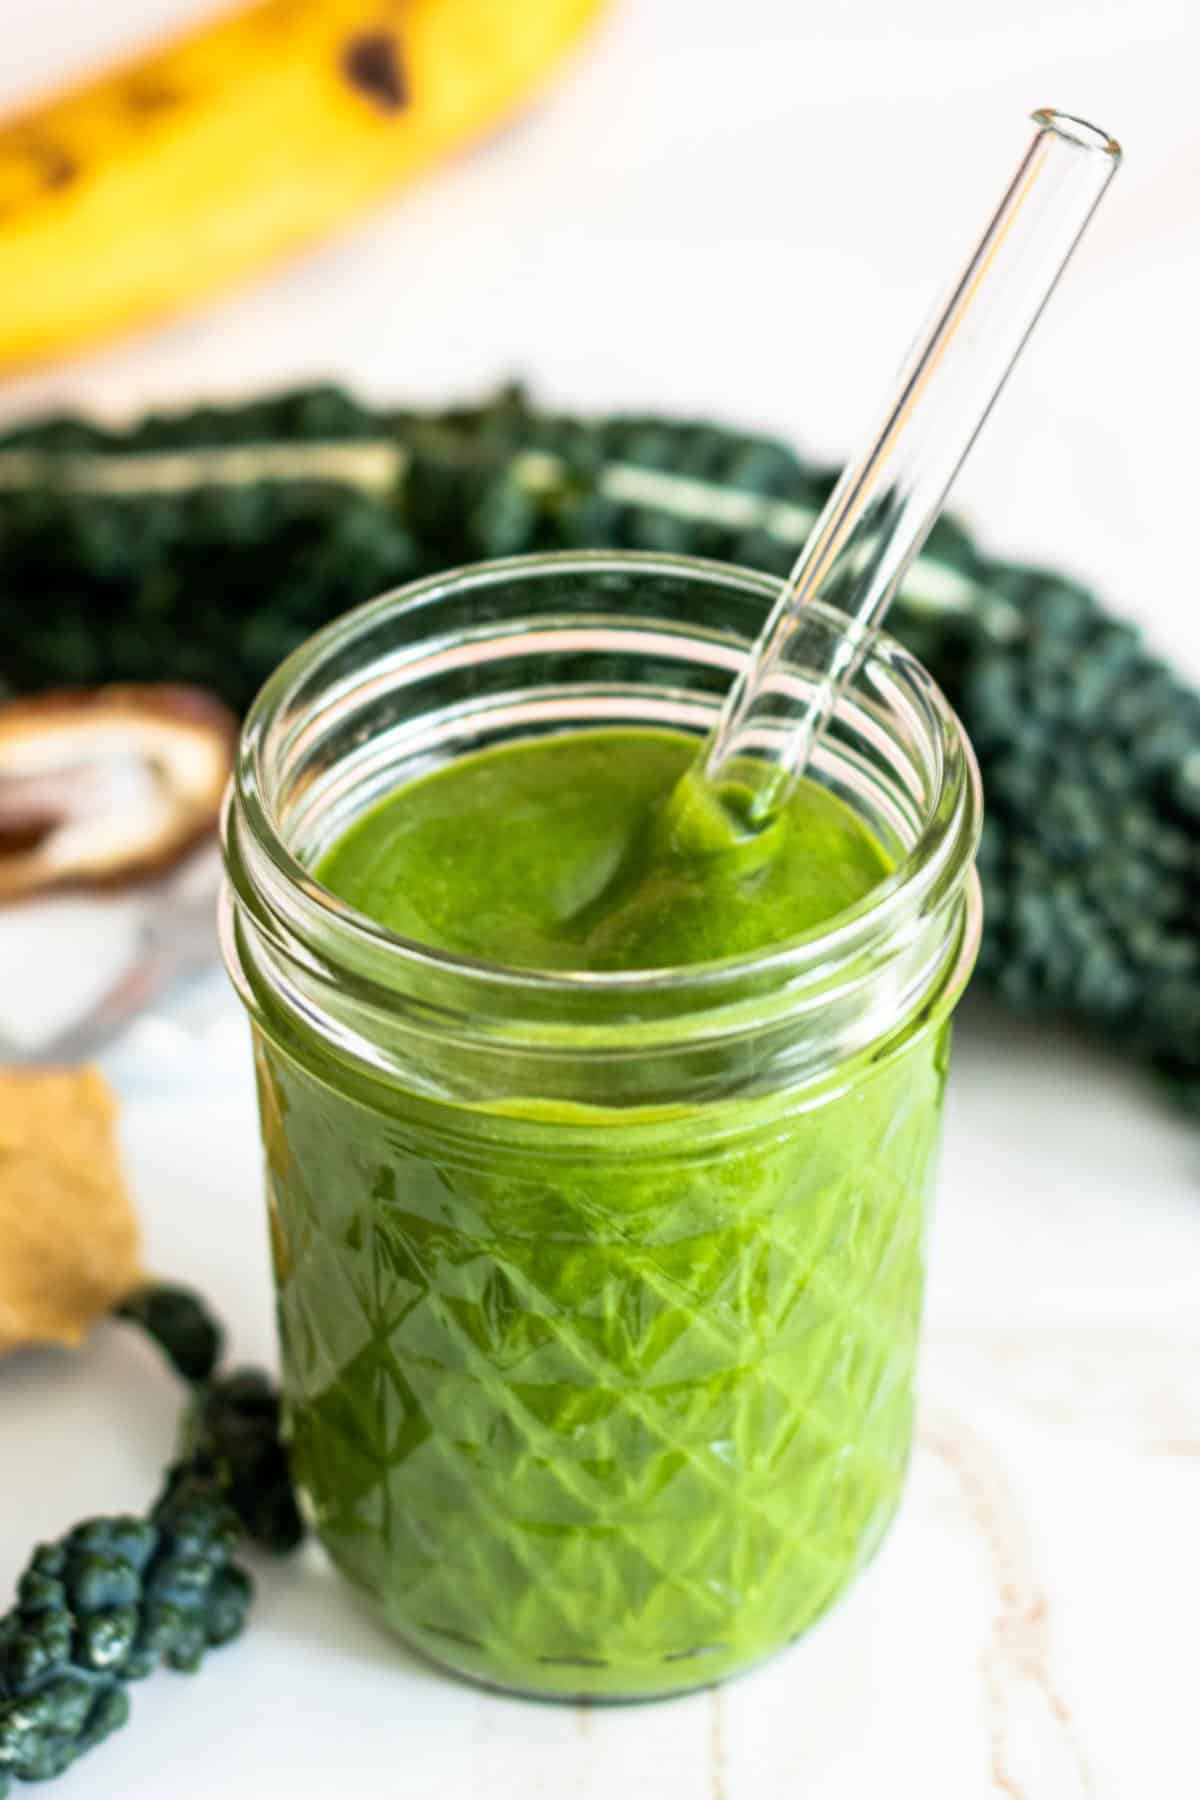 Green smoothie with a glass straw with kale leaves and a ripe banana in the background.